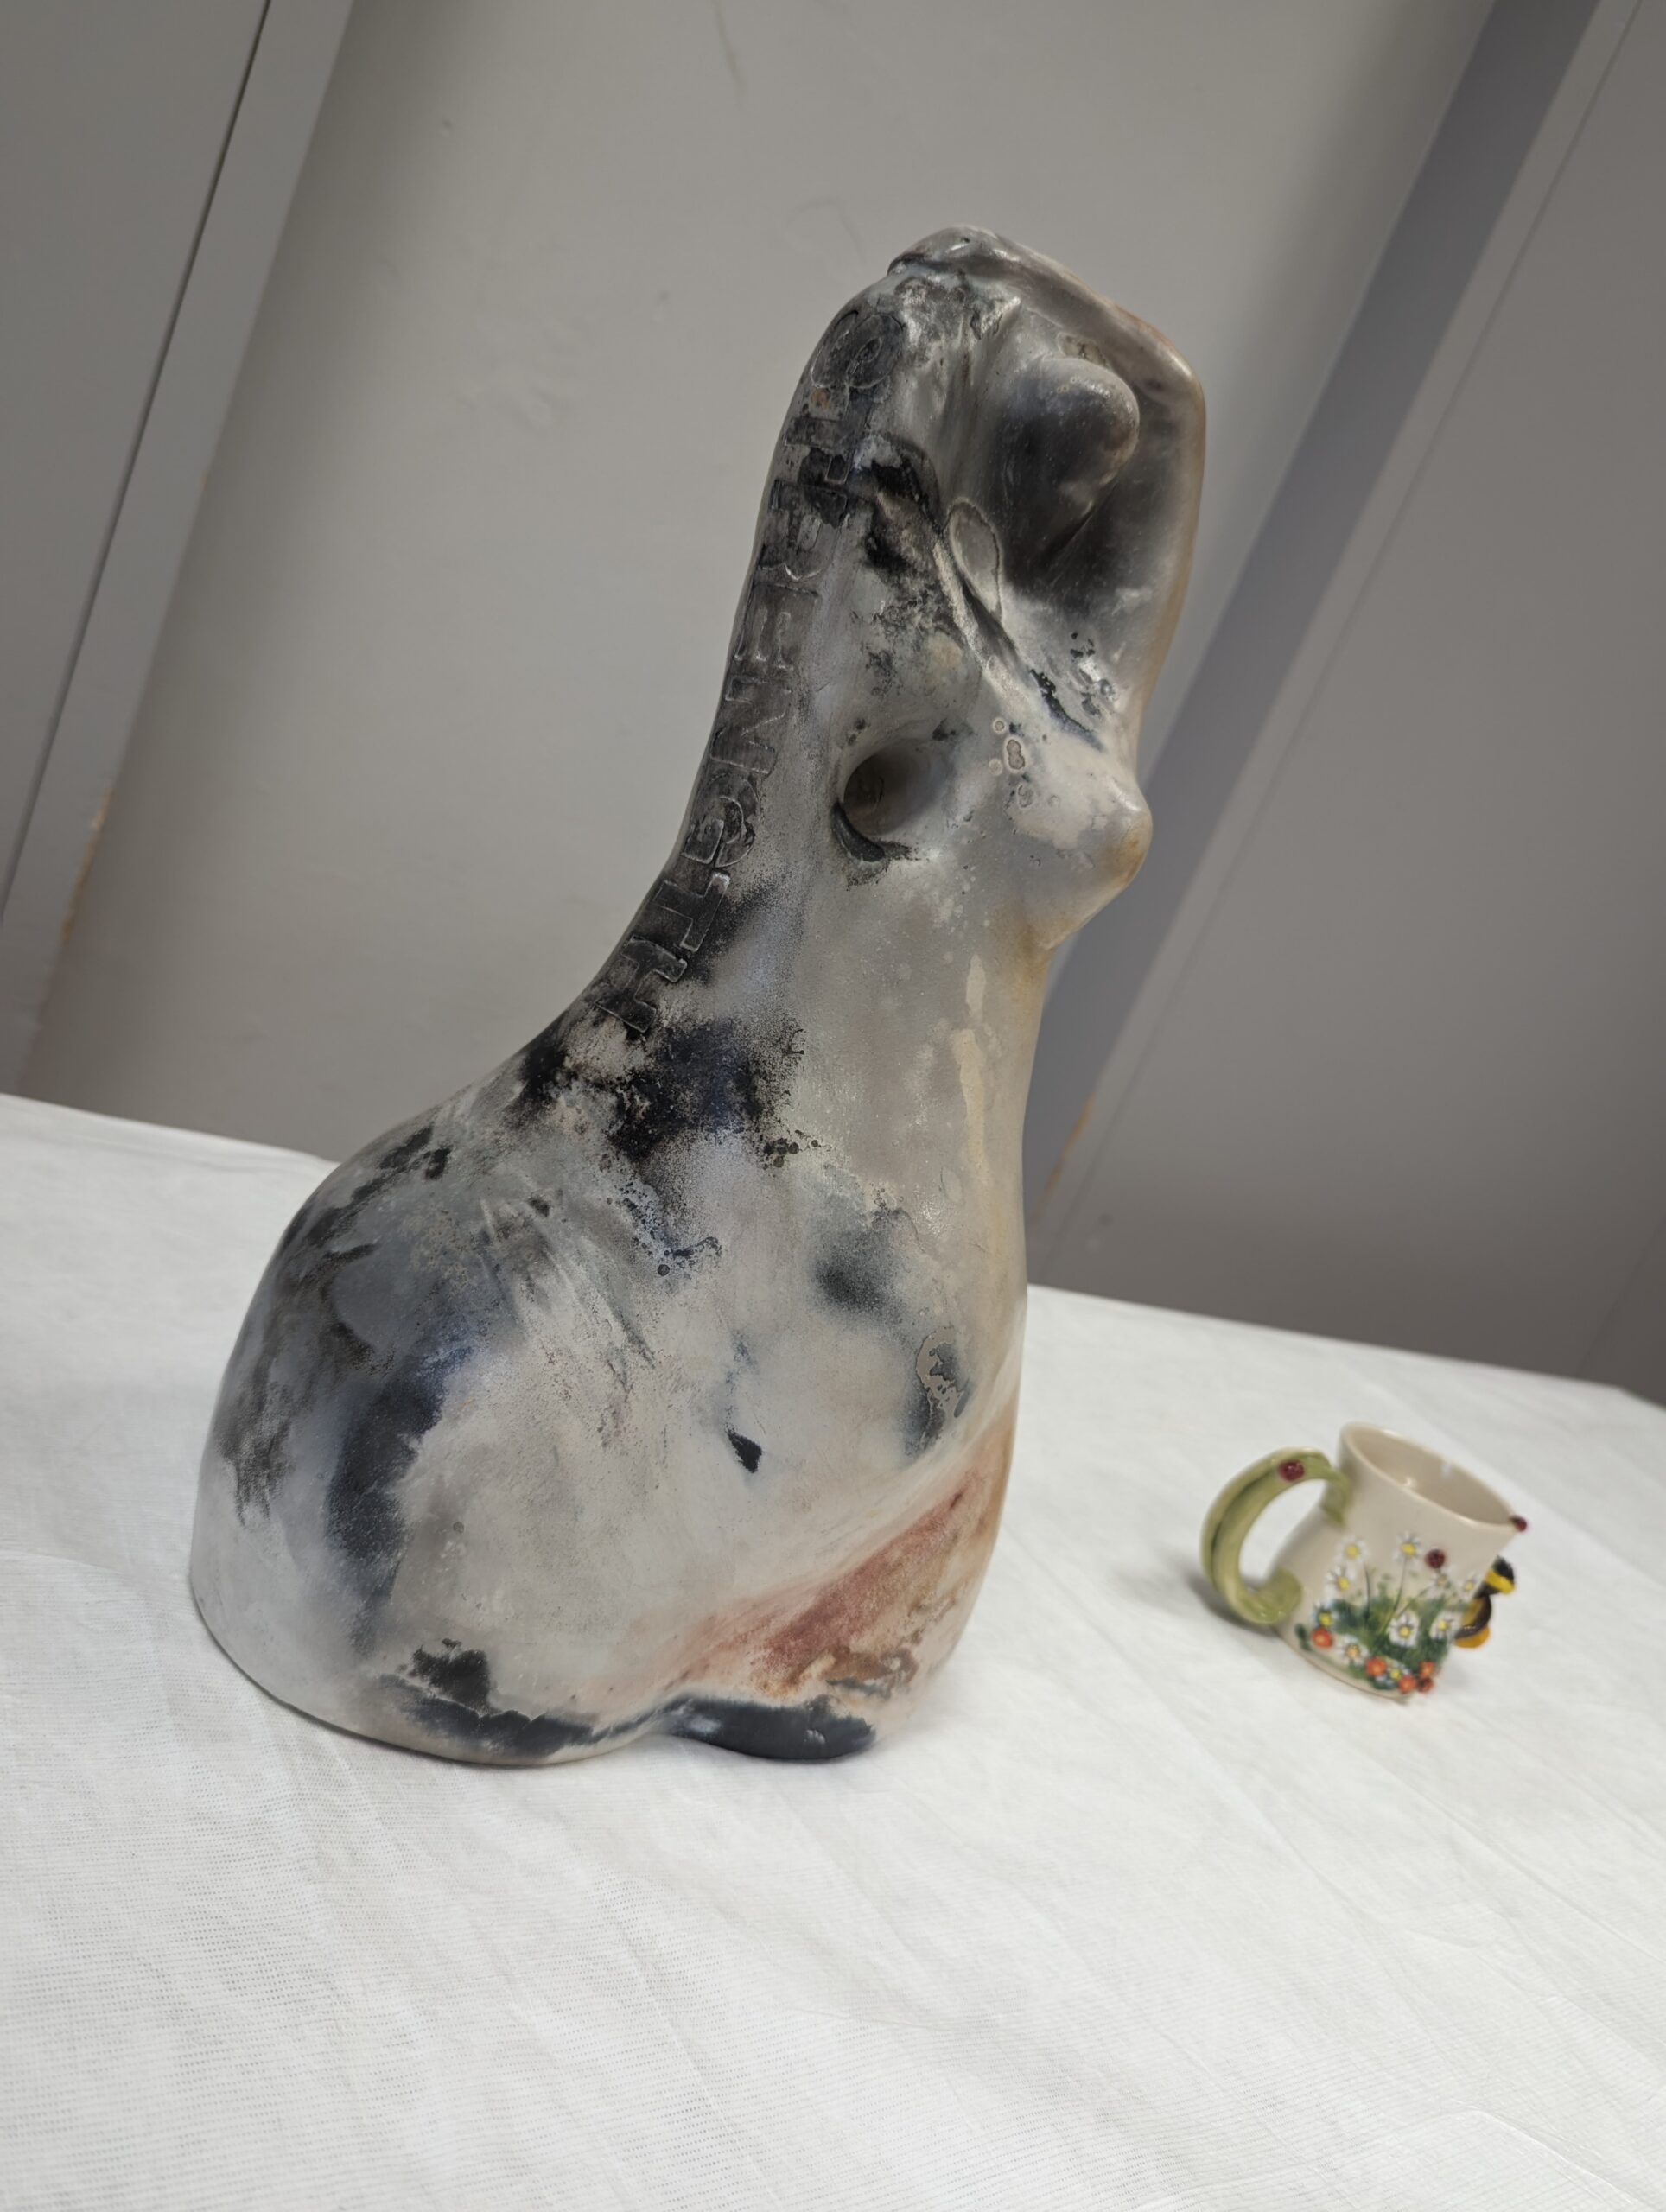 A silver and grey abstract statue of a woman holding her arms above her head, there is a hole where the right breast should be. Next to it is a small cream and green ceramic mug decorated with flowers and a fairy.